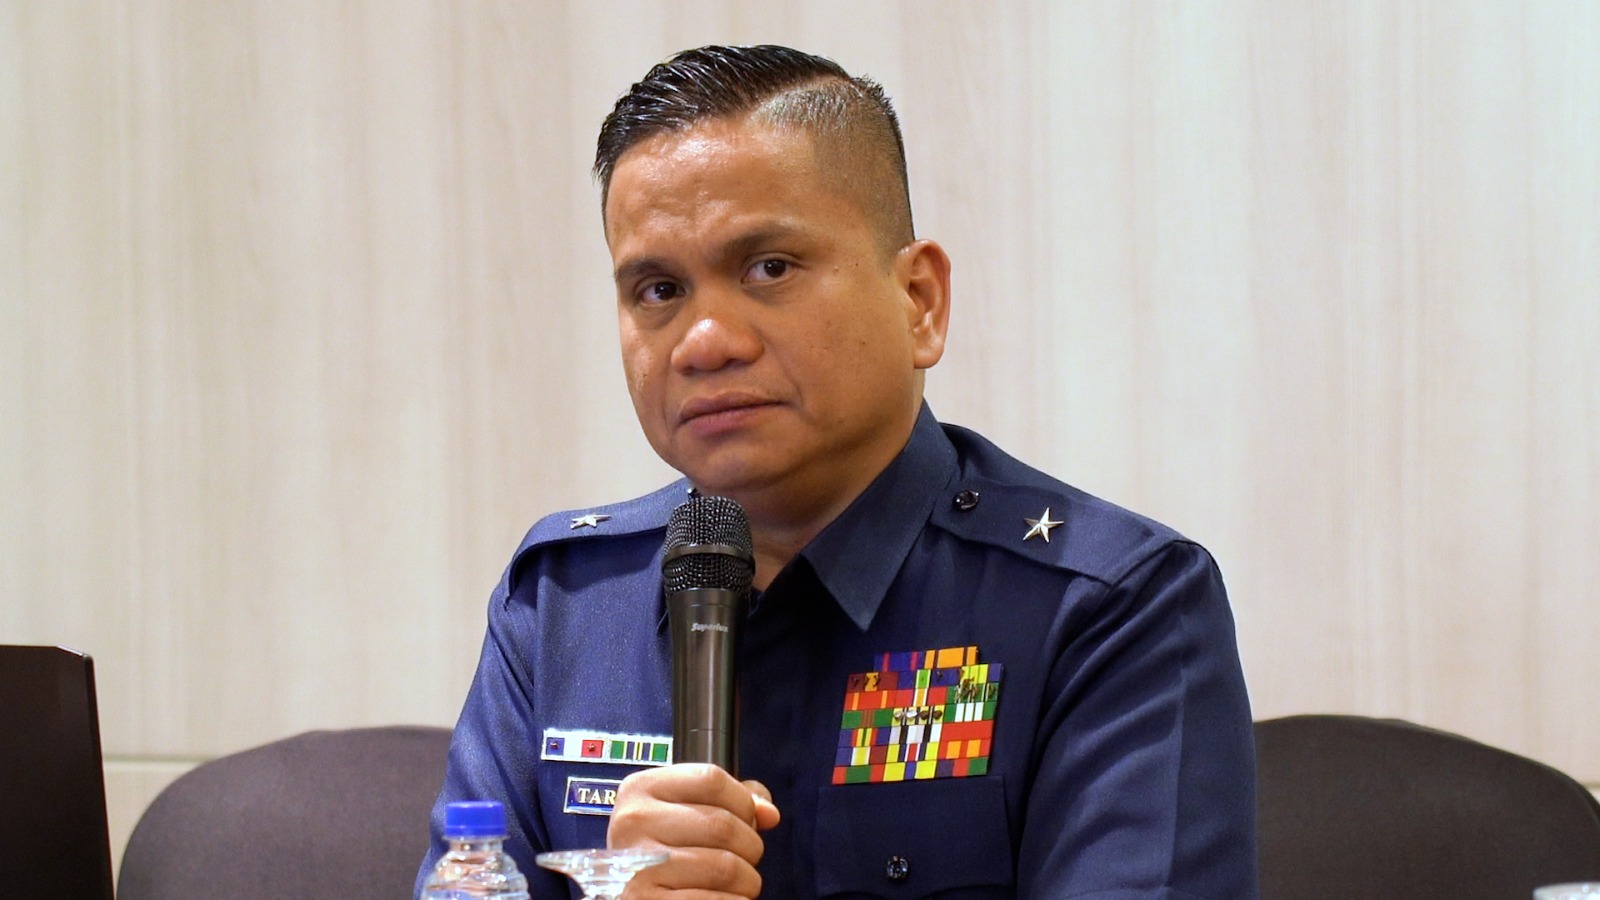 The limited information in the West Philippine Sea situation under the administration of former President Rodrigo Duterte has allowed misinformation to proliferate.